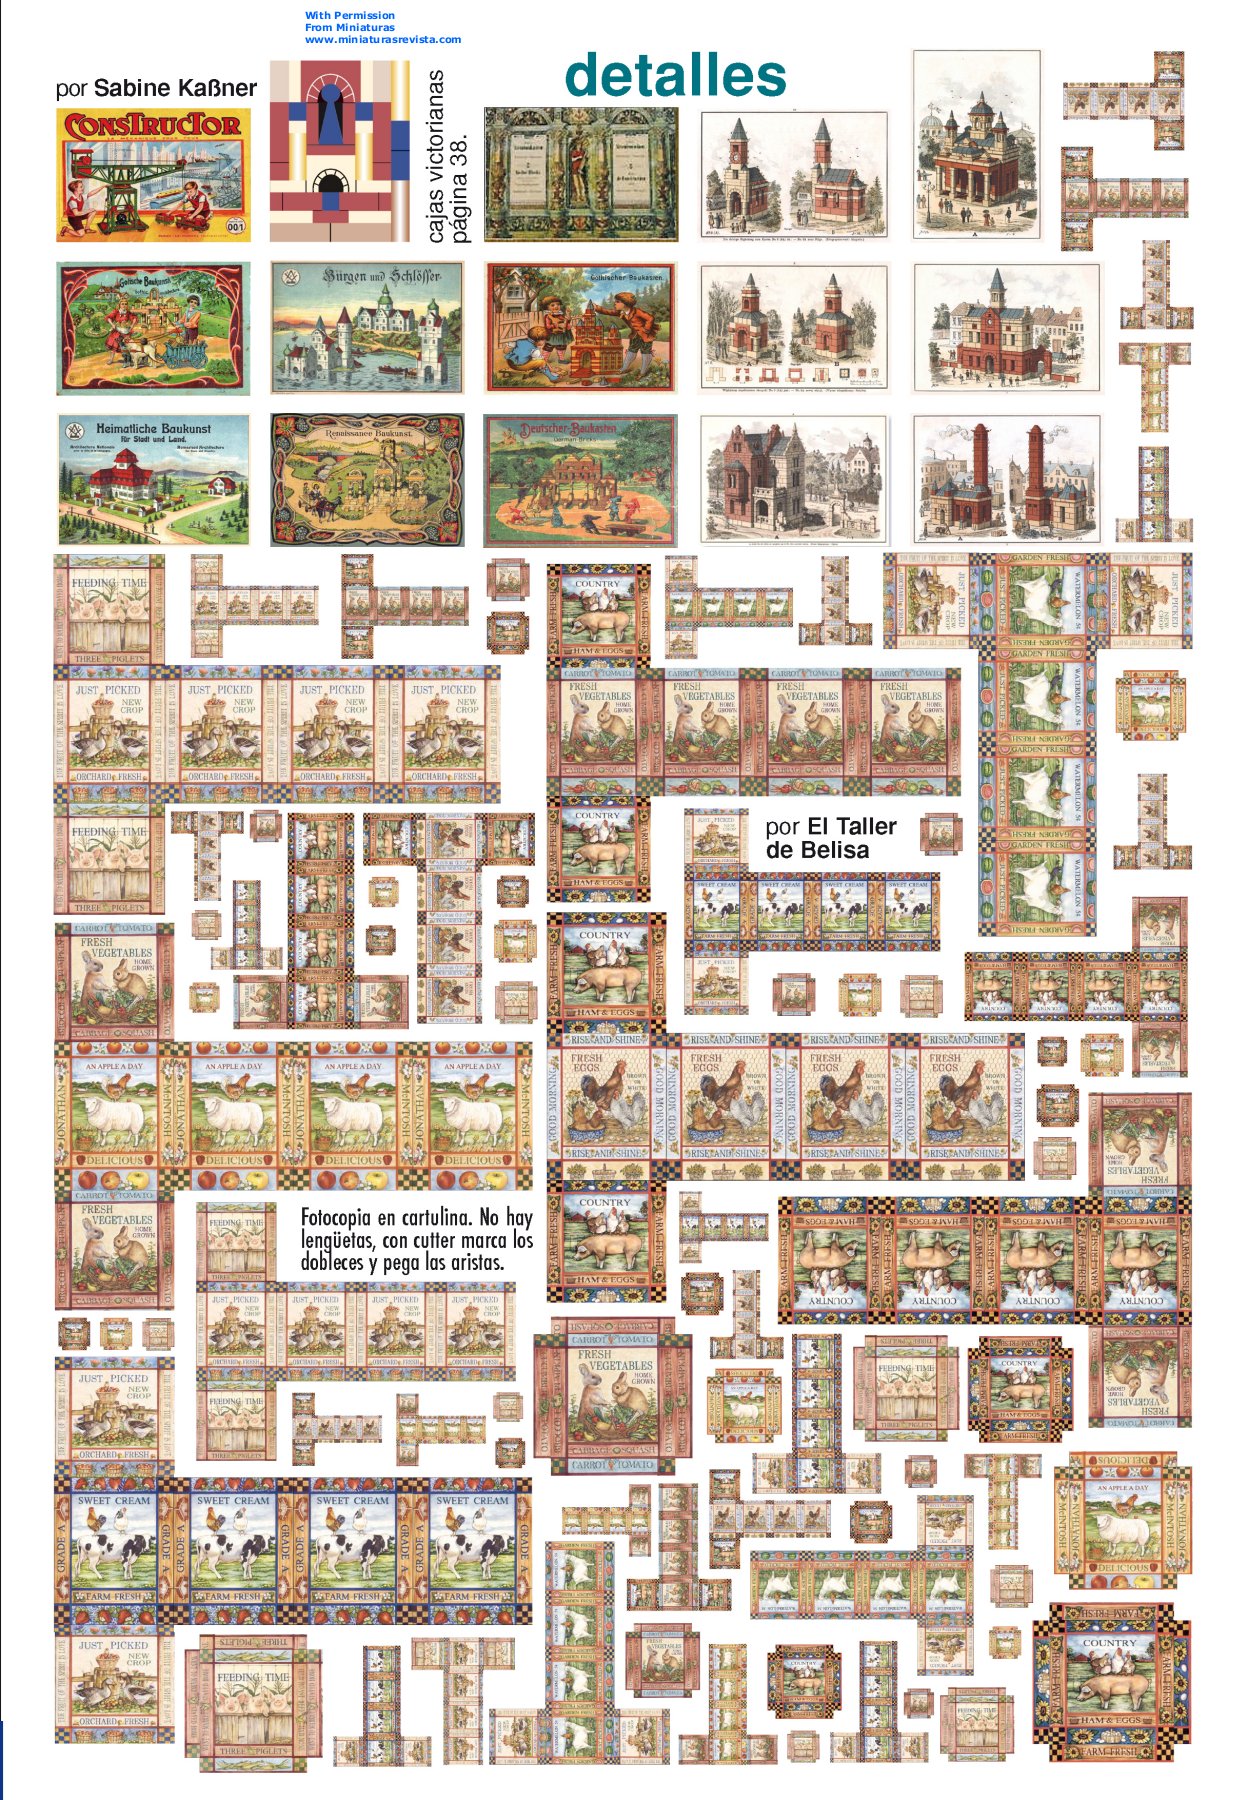 free-download-free-dolls-house-miniature-printable-wallpaper-review-ebooks-1248x1800-for-your